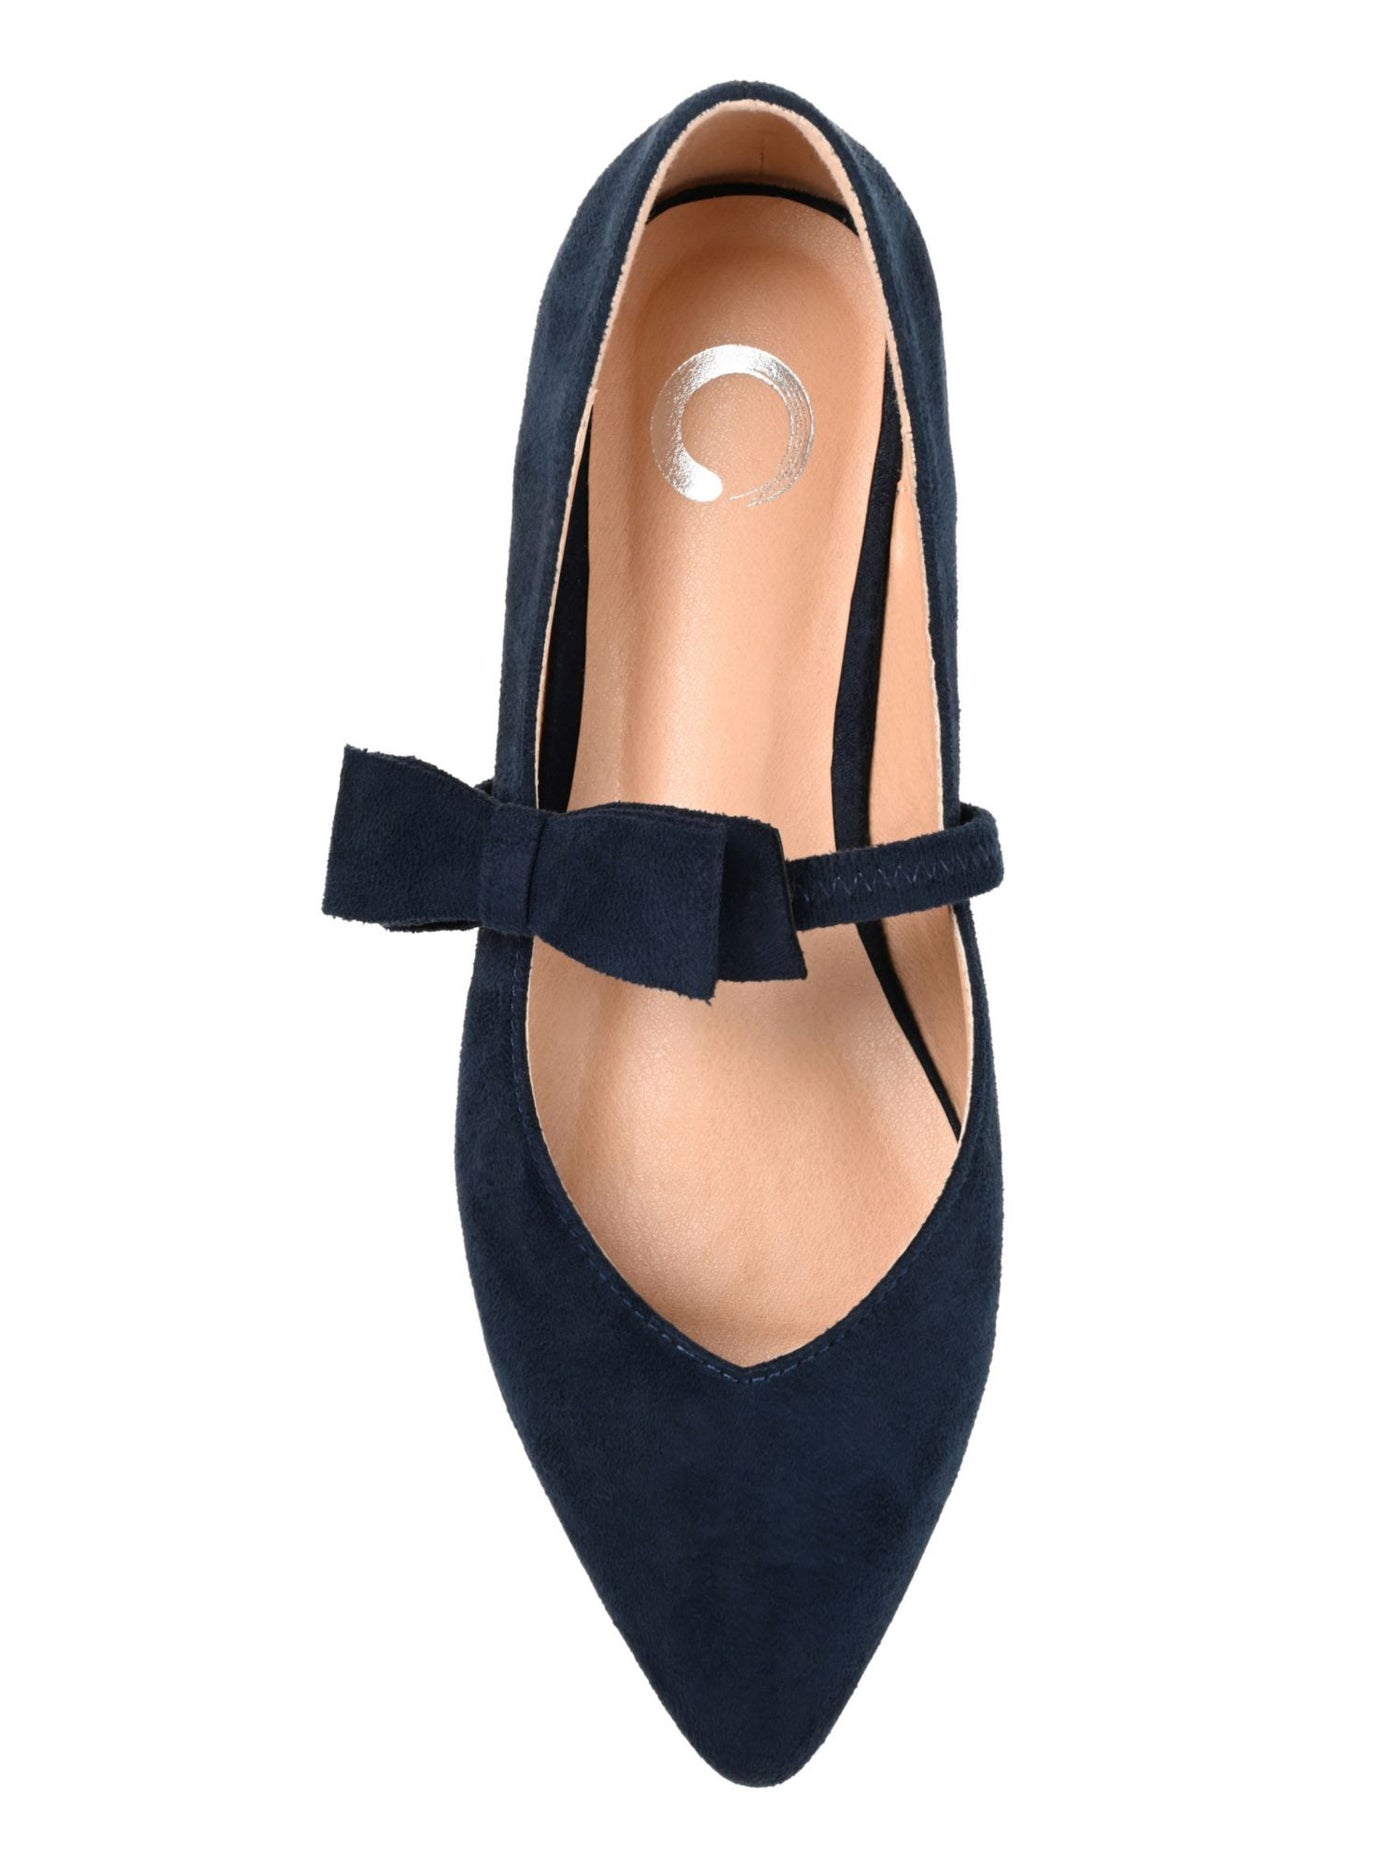 JOURNEE COLLECTION Womens Navy Bow Strap Mary Jane Goring Padded Aizlynn Pointed Toe Slip On Flats Shoes 11